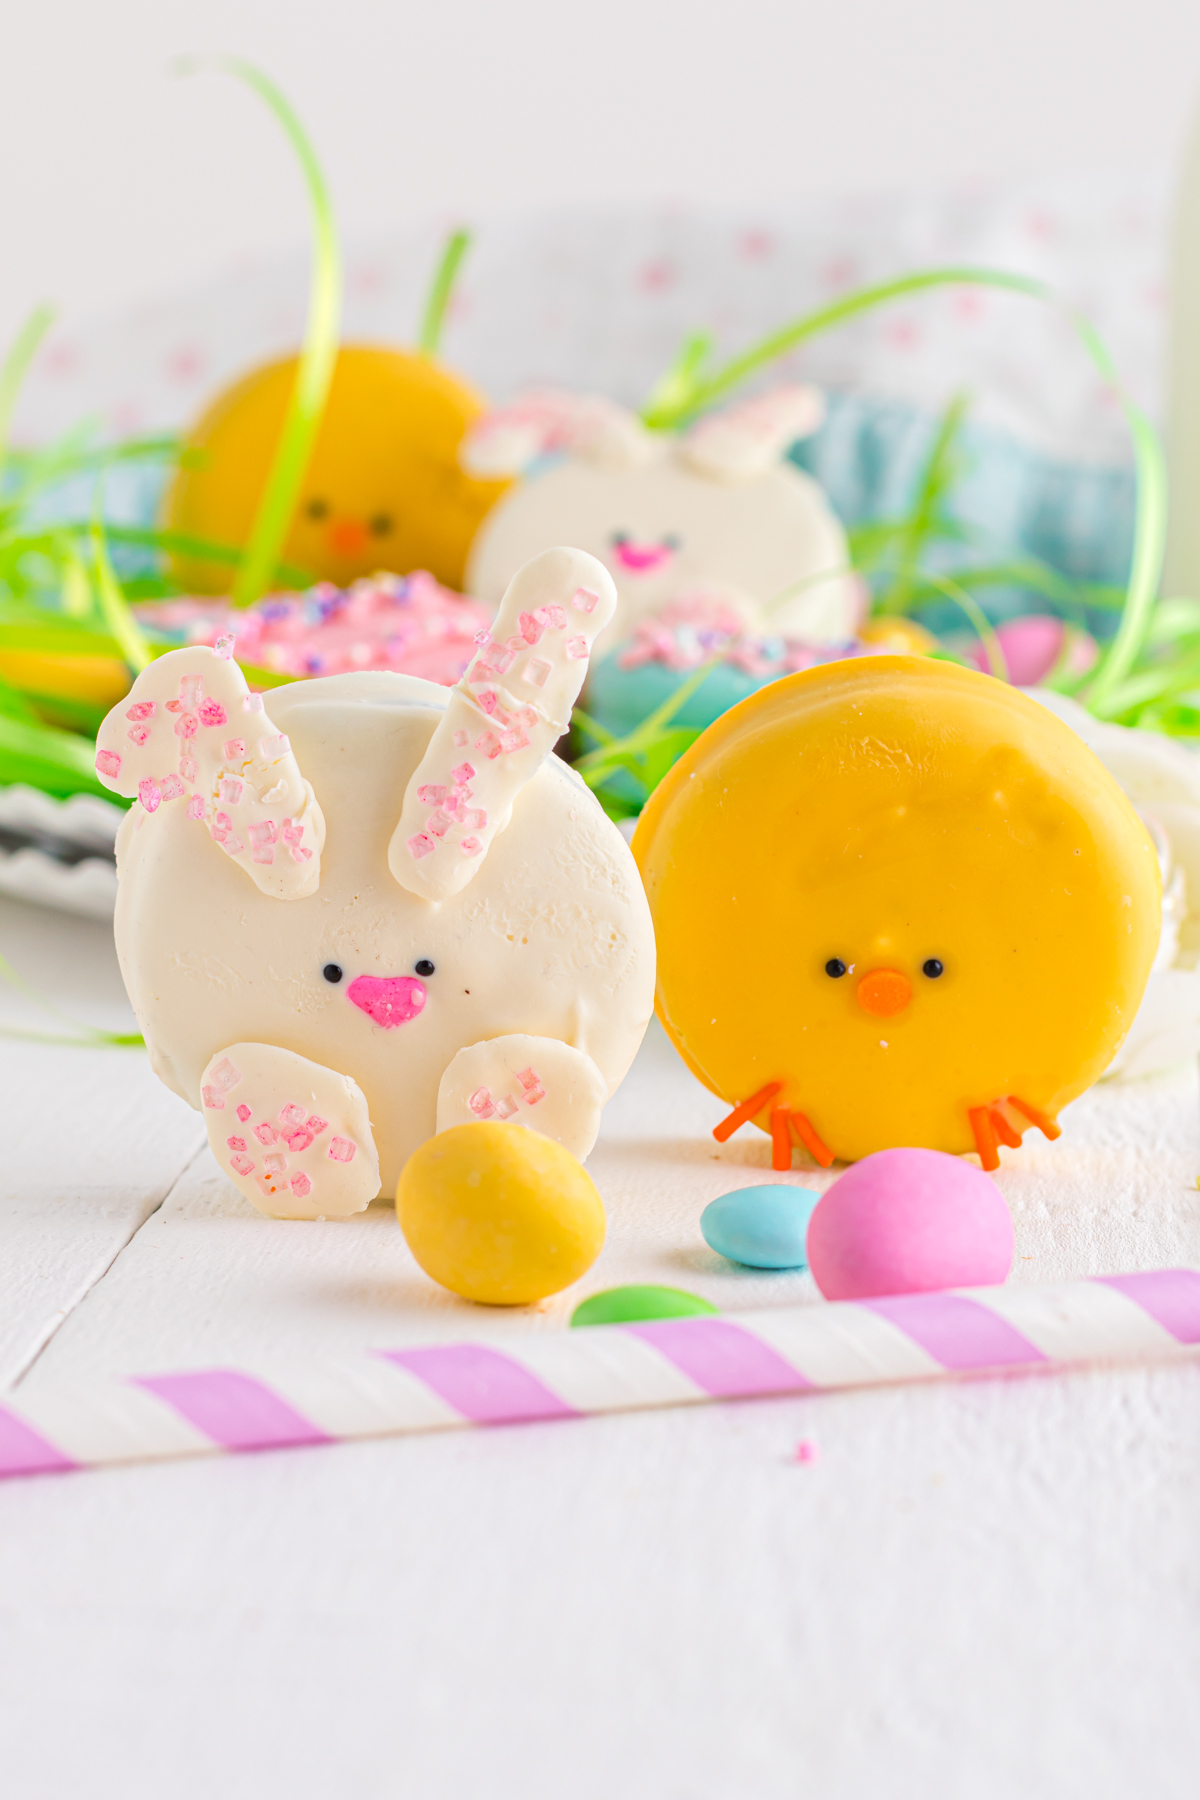 Bunny and chick decorated Oreos.